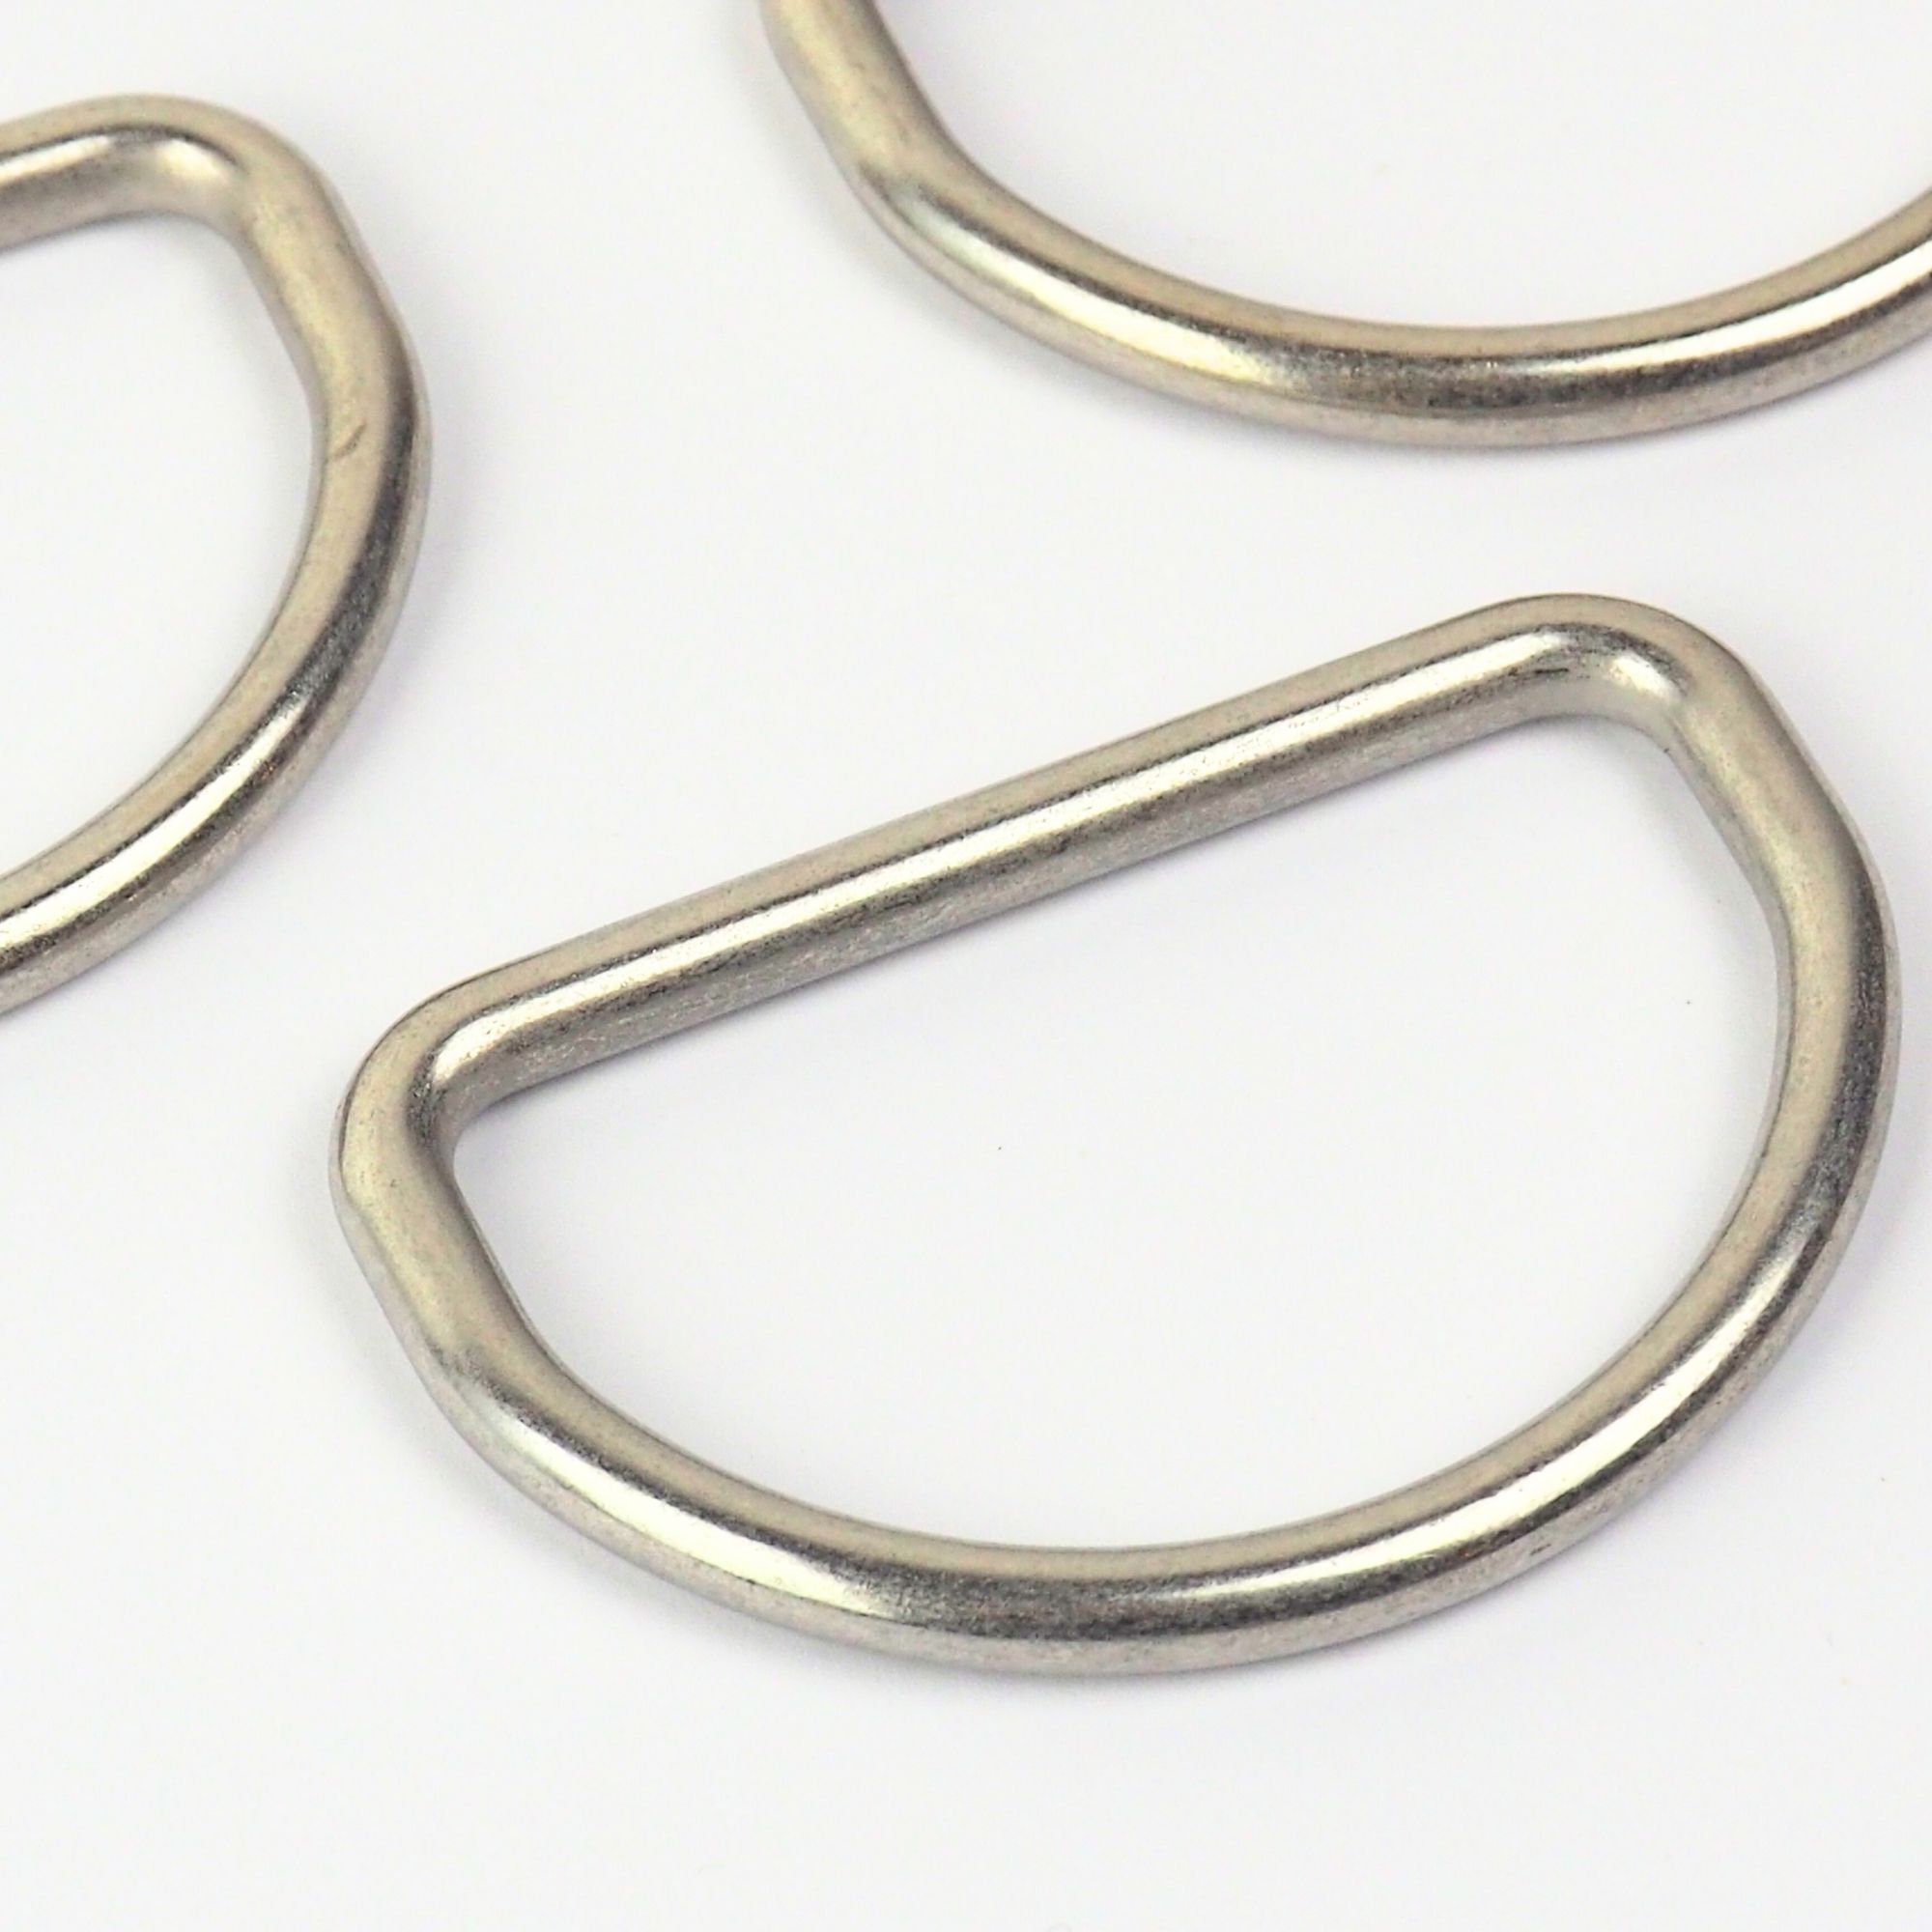 1 Welded D-Ring, For Bagmaking, D Ring, Sewing Notion, Purse